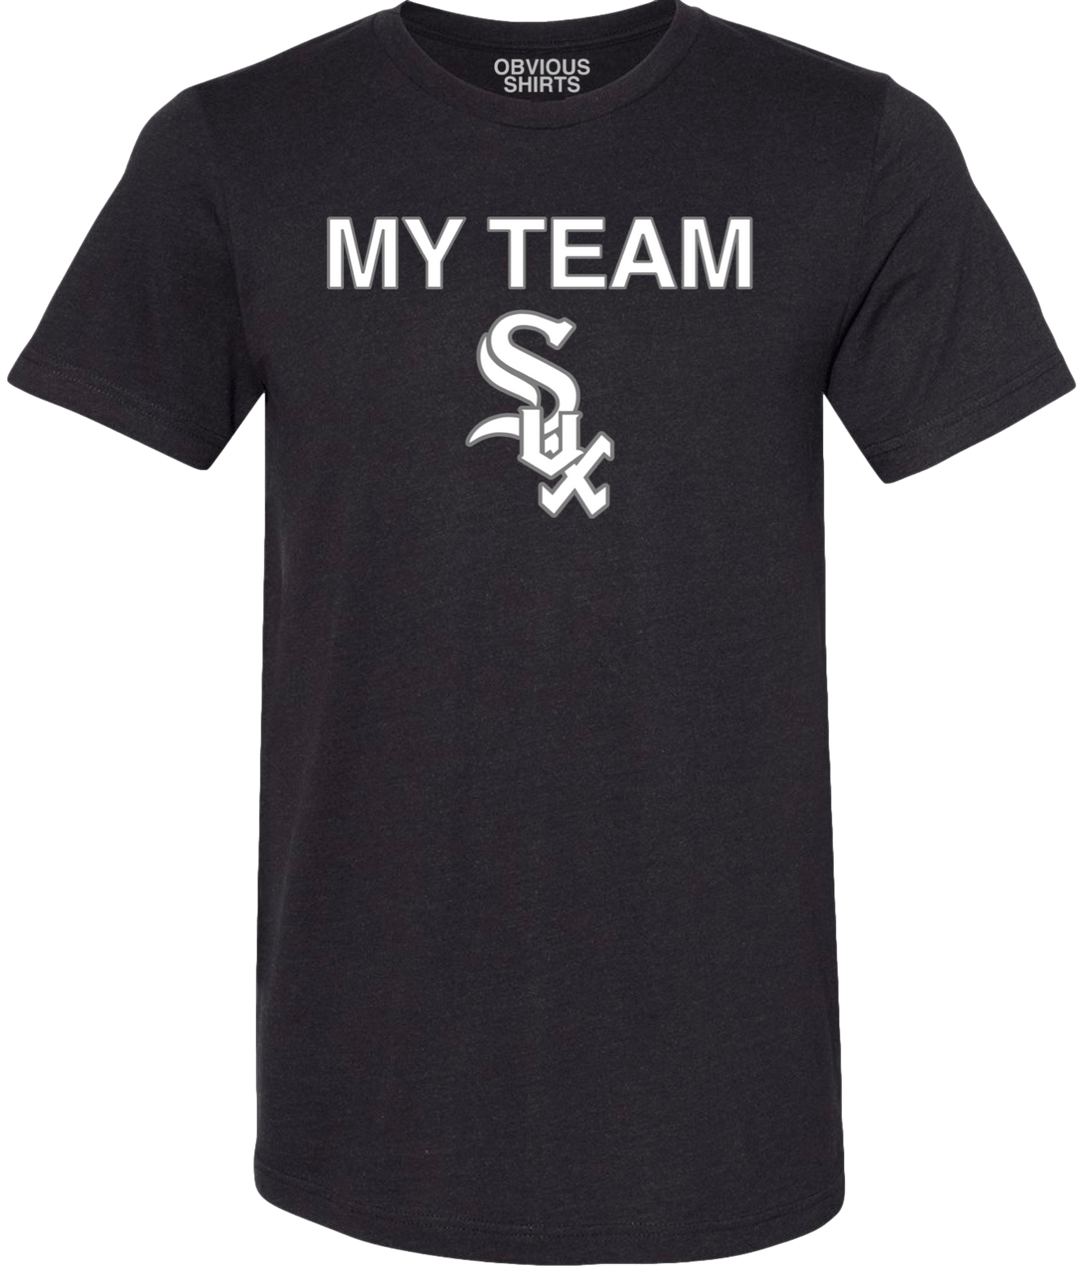 MY TEAM SUX. - OBVIOUS SHIRTS